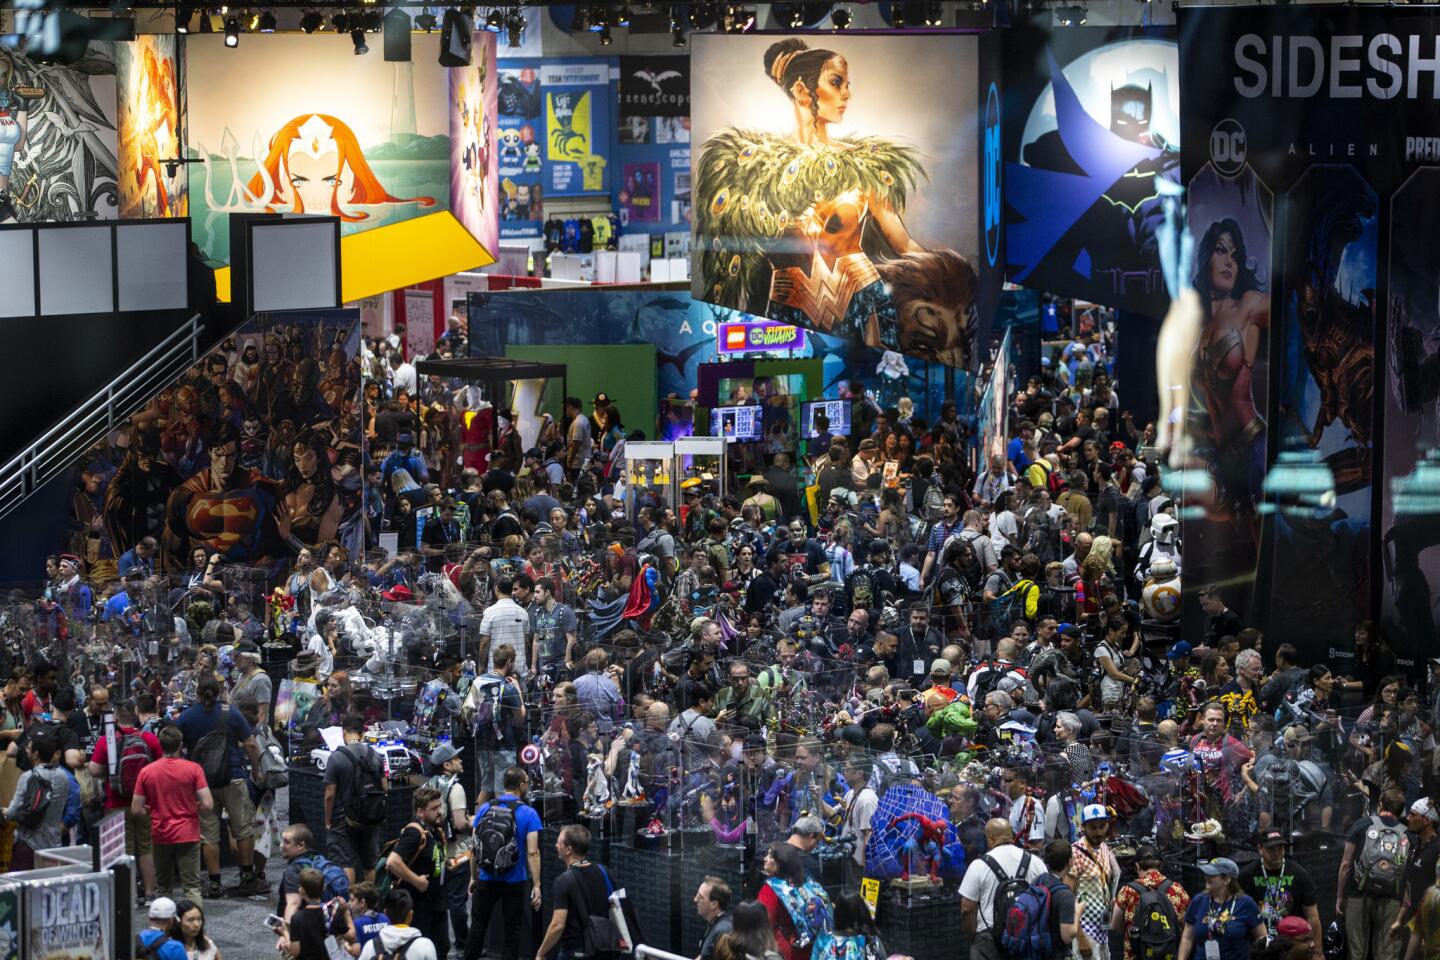 Welcome to the 2018 Comic-Con world of fantasy